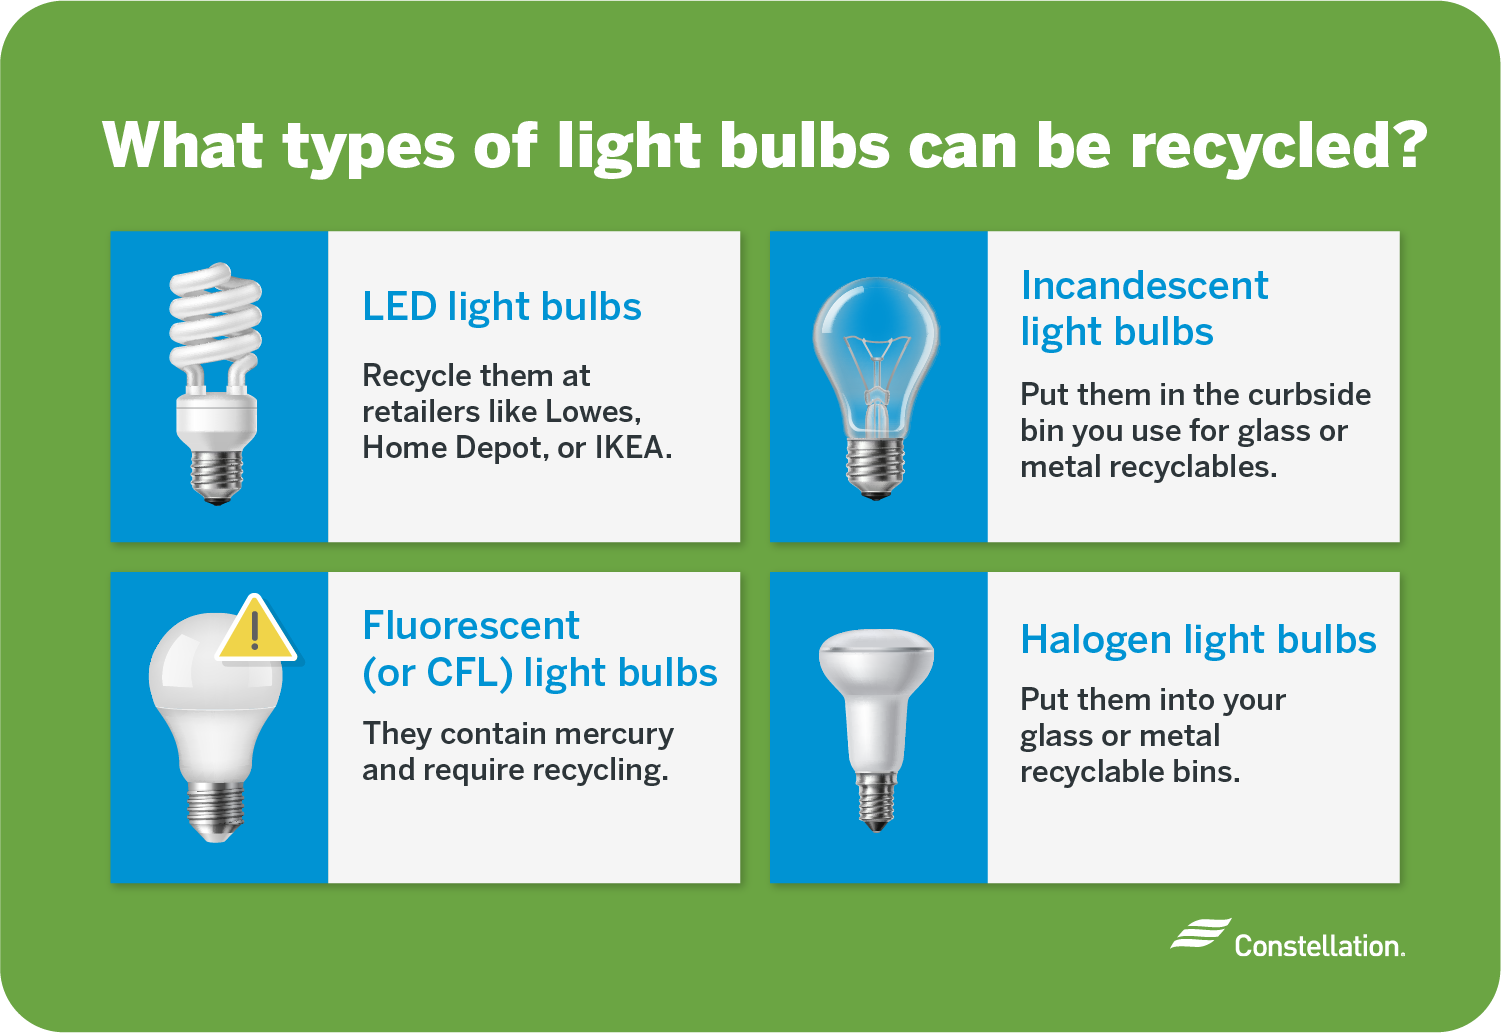 What types of light bulbs can be recycled